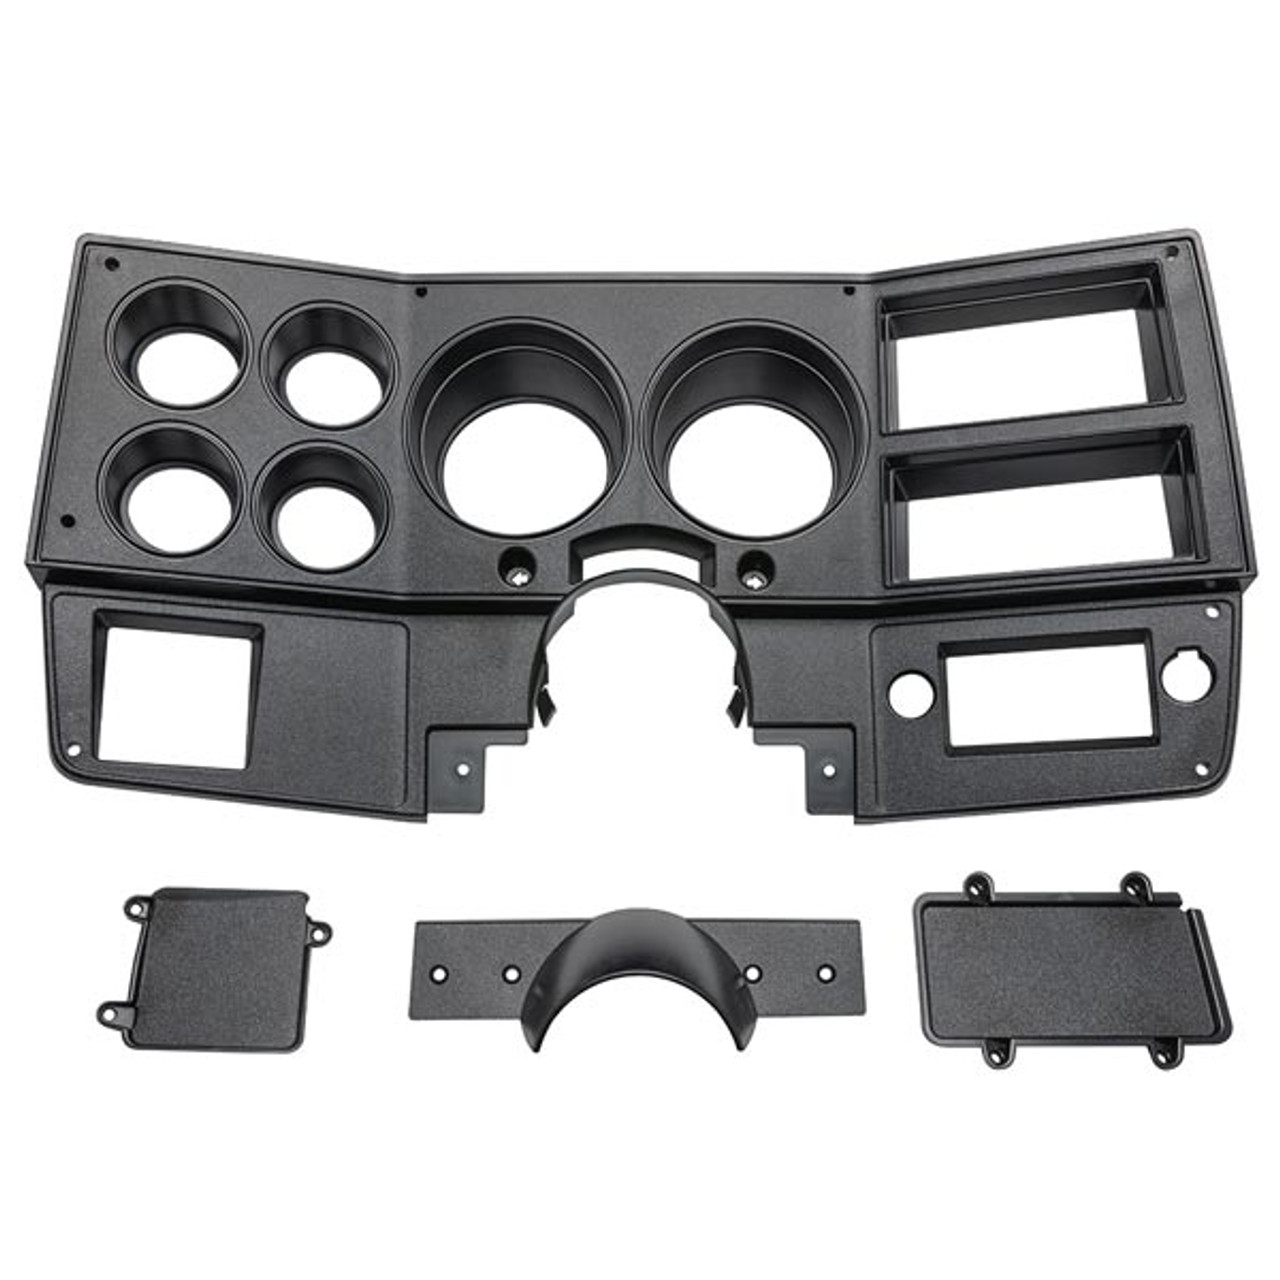 GlowShift  Replacement 6 Gauge Cluster Dashboard Panel for 1973